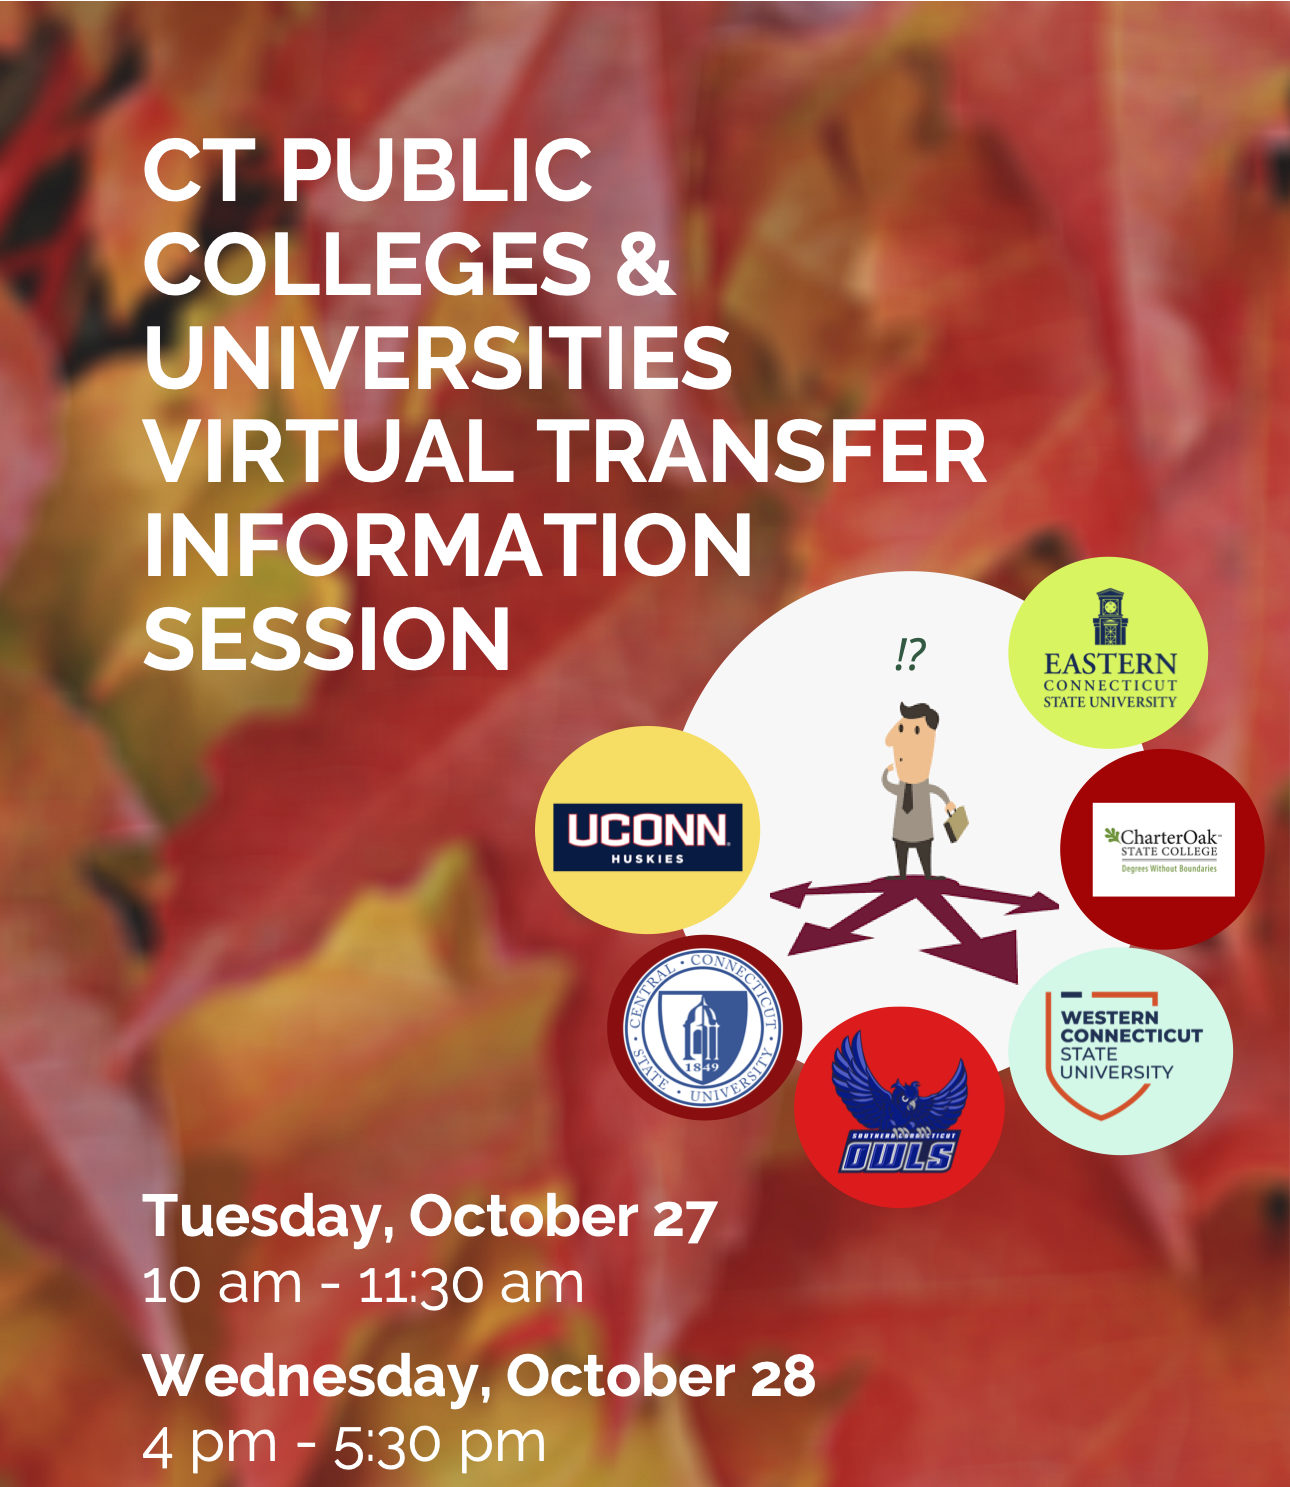 A flyer for the CT Public Colleges and Universities Virtual Transfer Information Session hosted October 27 and 28